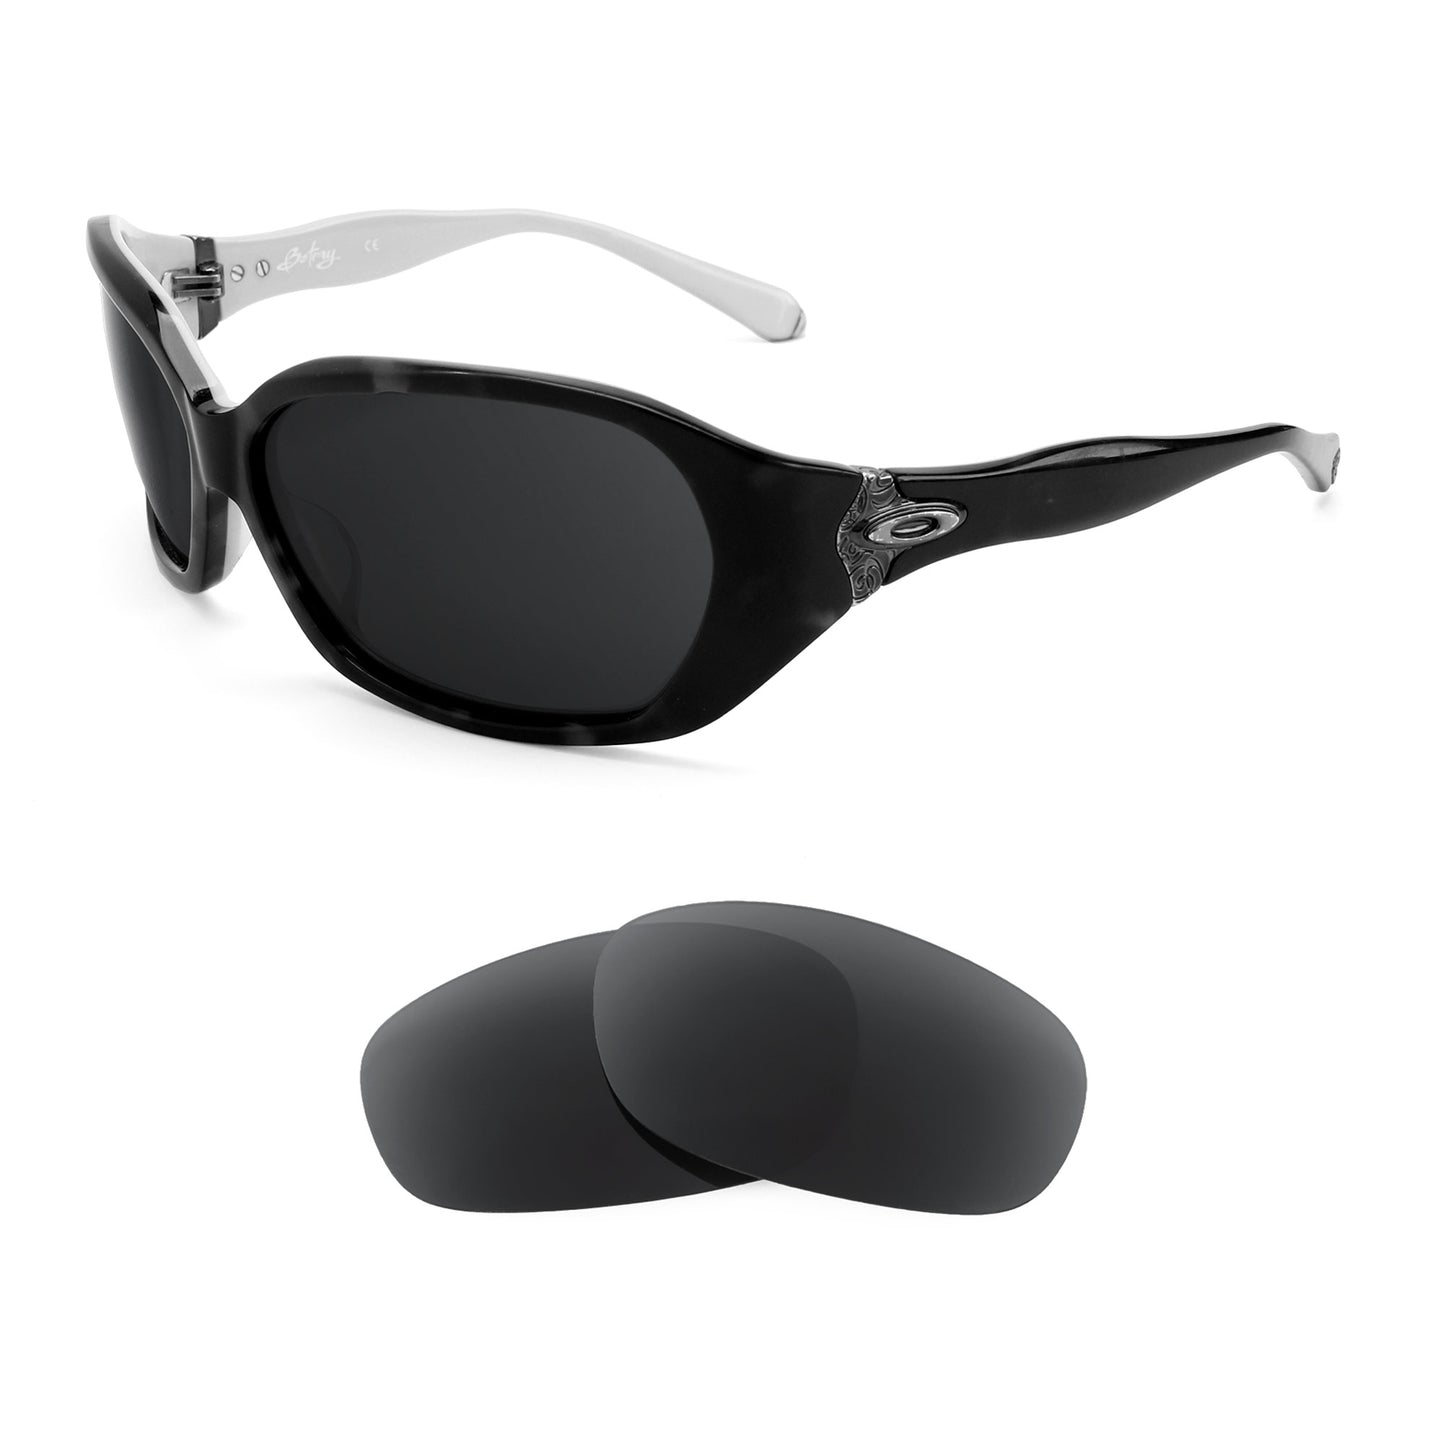 Oakley Betray sunglasses with replacement lenses